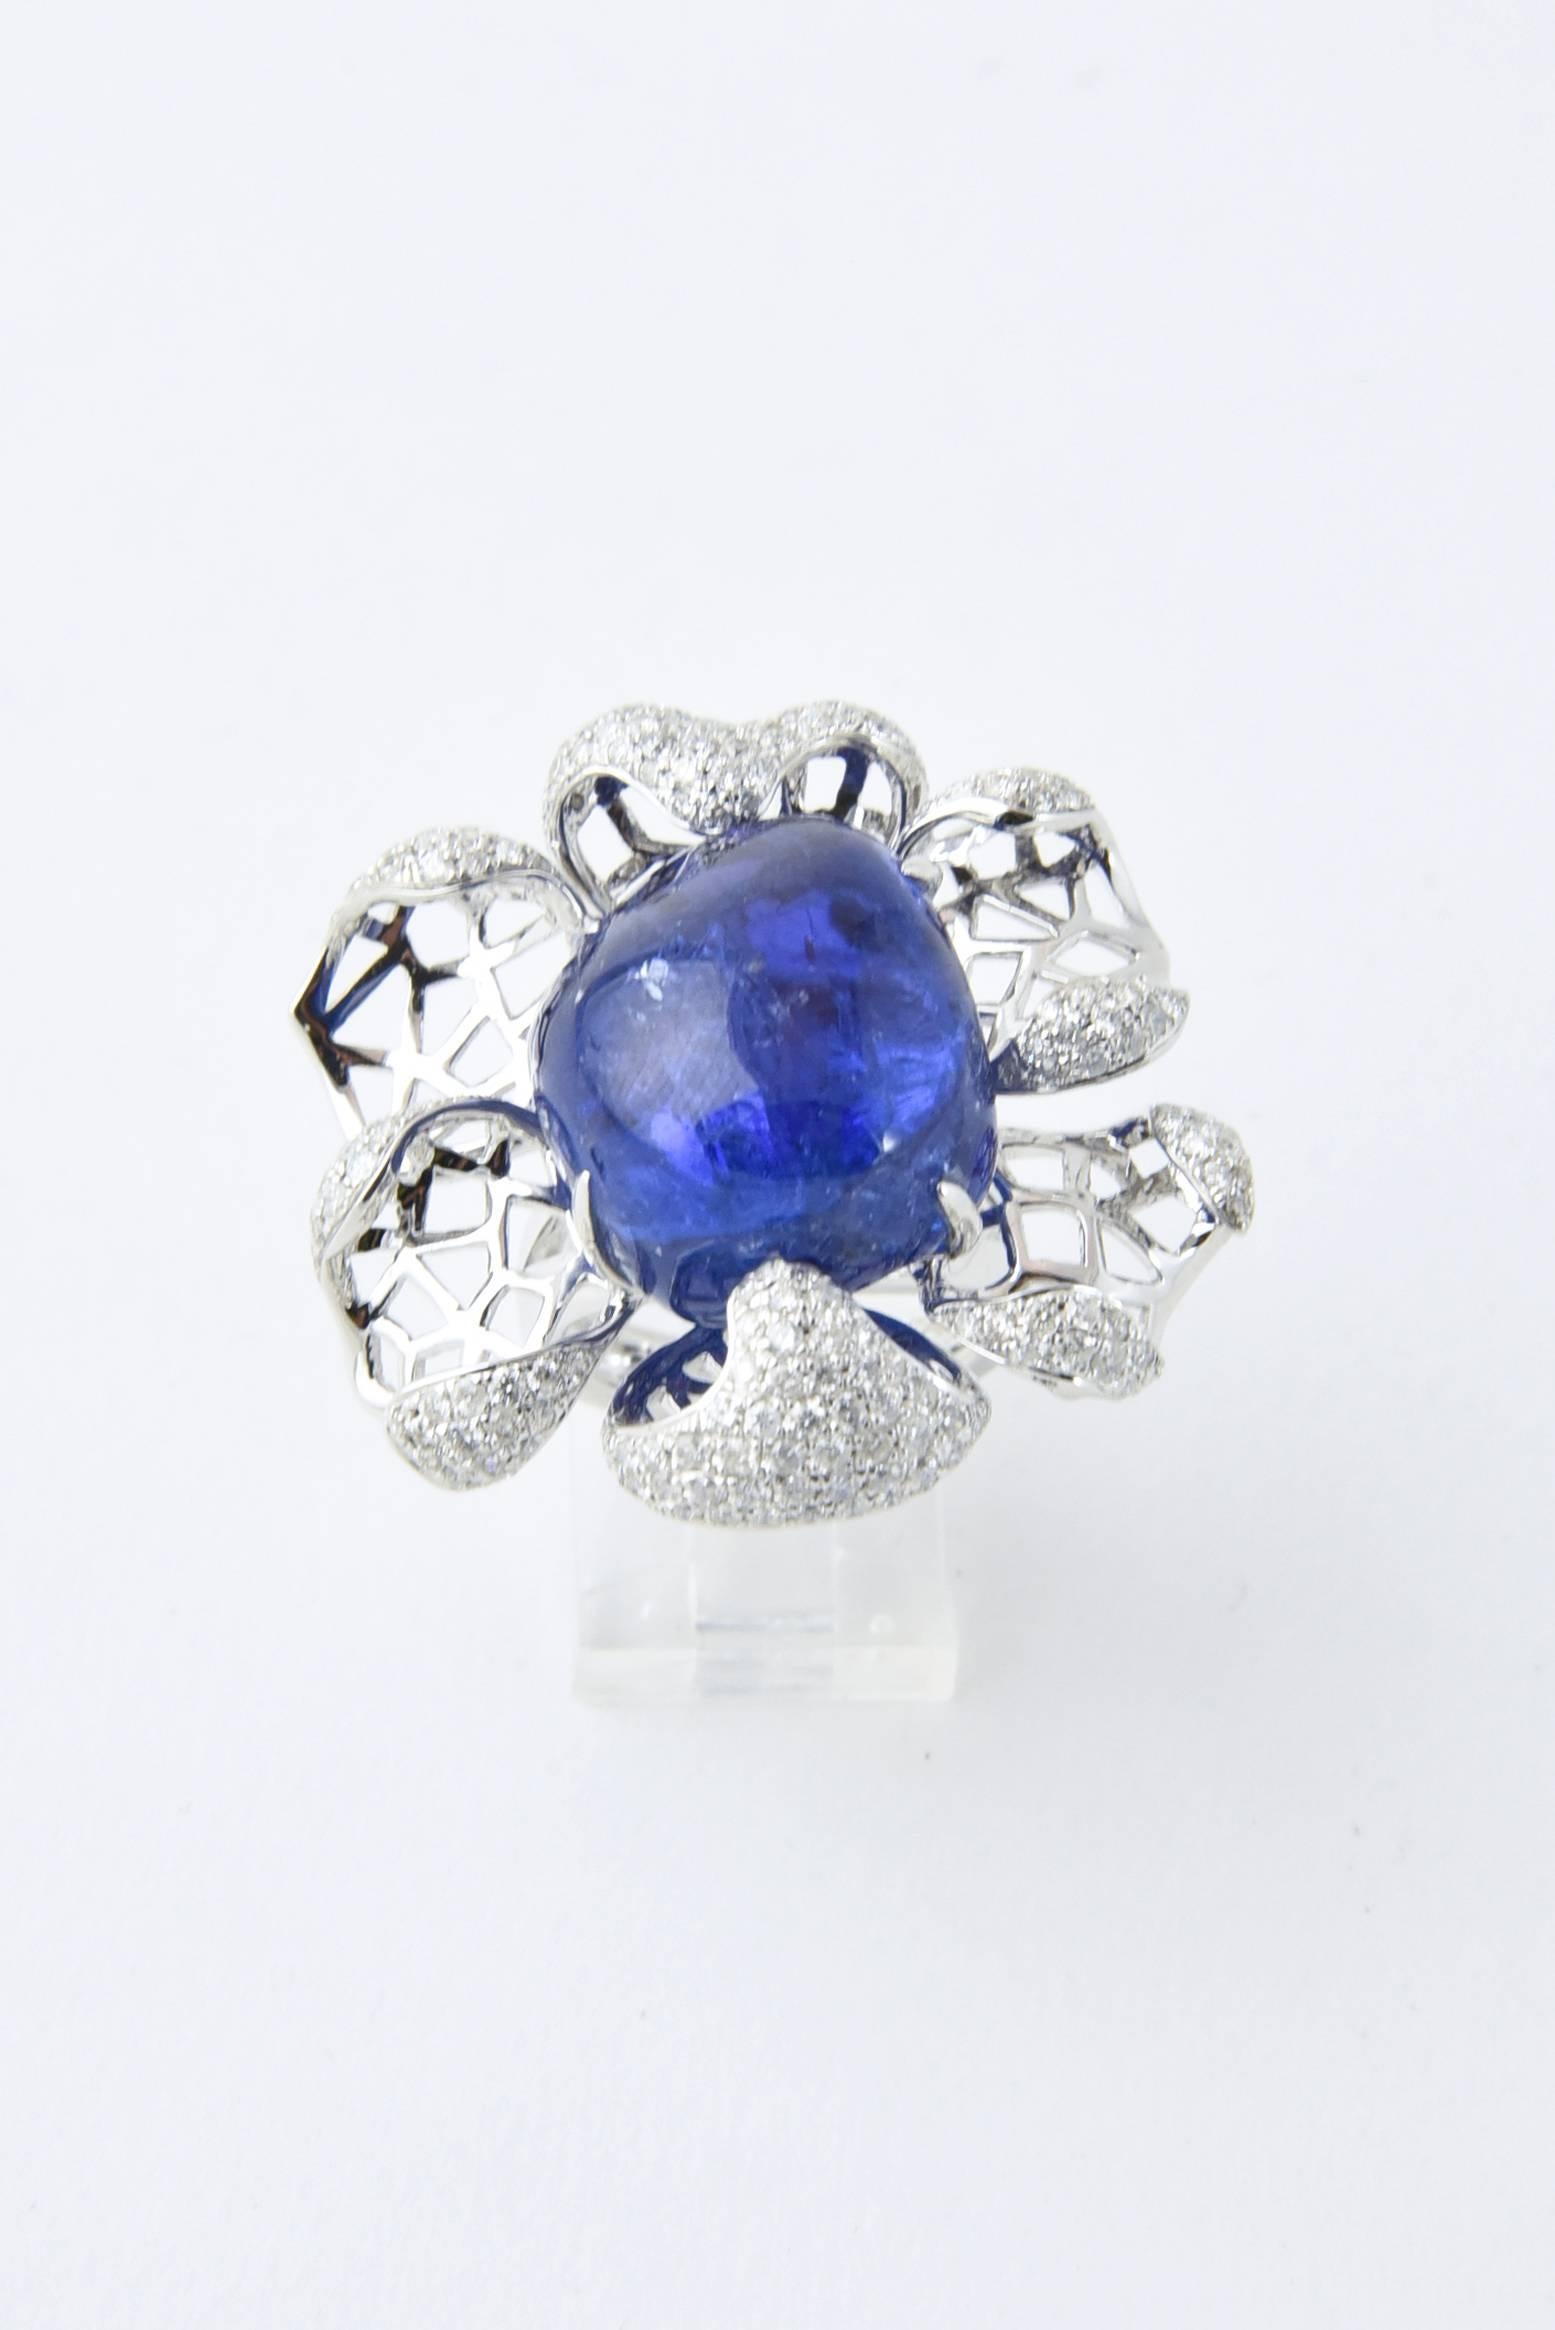 Impressive three dimensional flower cocktail ring featuring open gold work and pave diamond petals with a centralized 54 carat cabochon tanzanite.